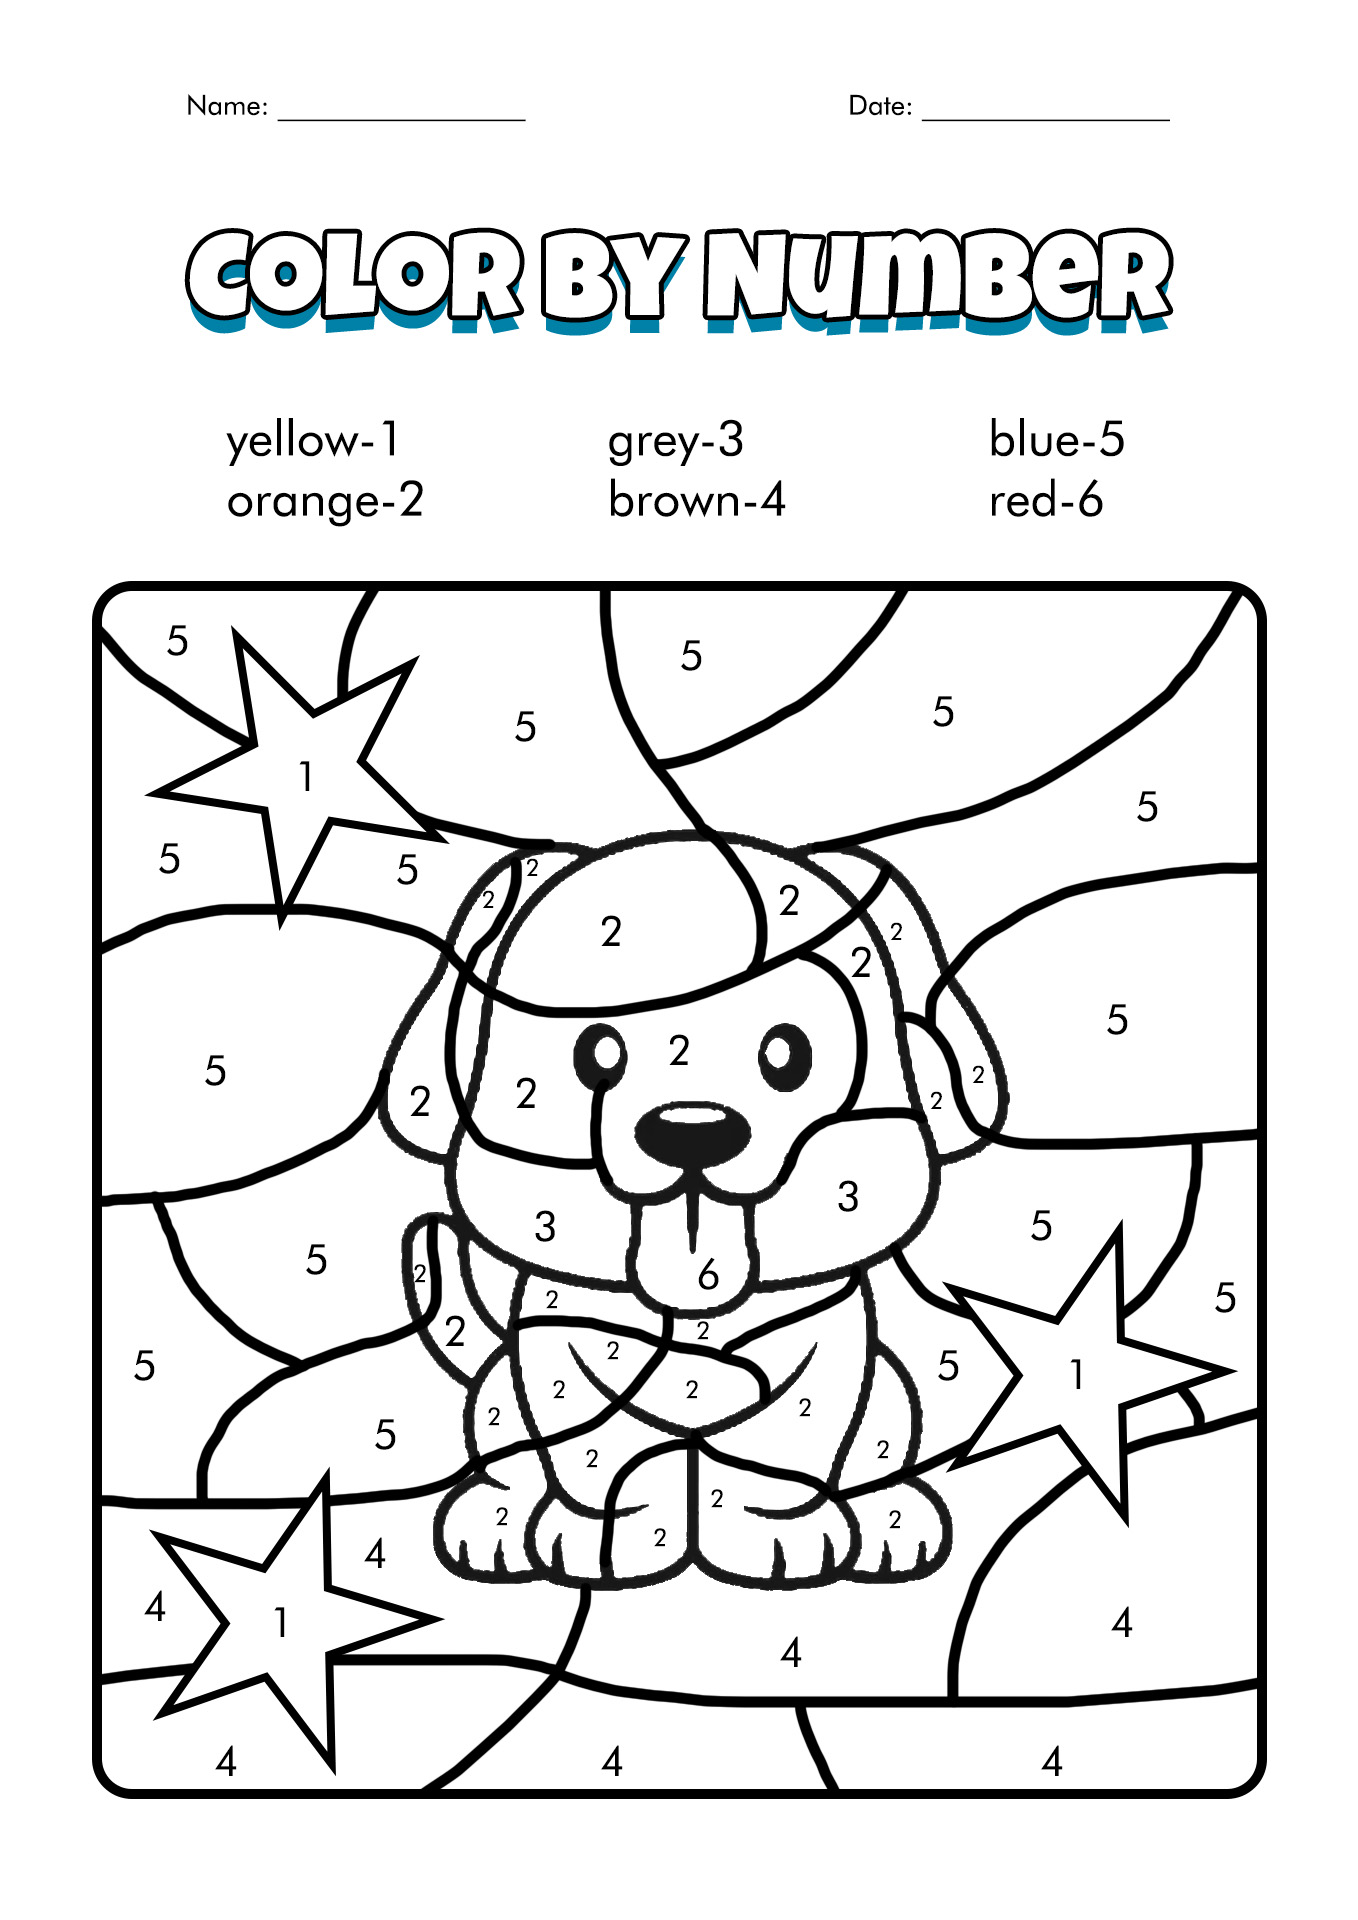 coloring-page-color-by-number-adults-free-printables-image-ideas-uncategorized-adult-coloring